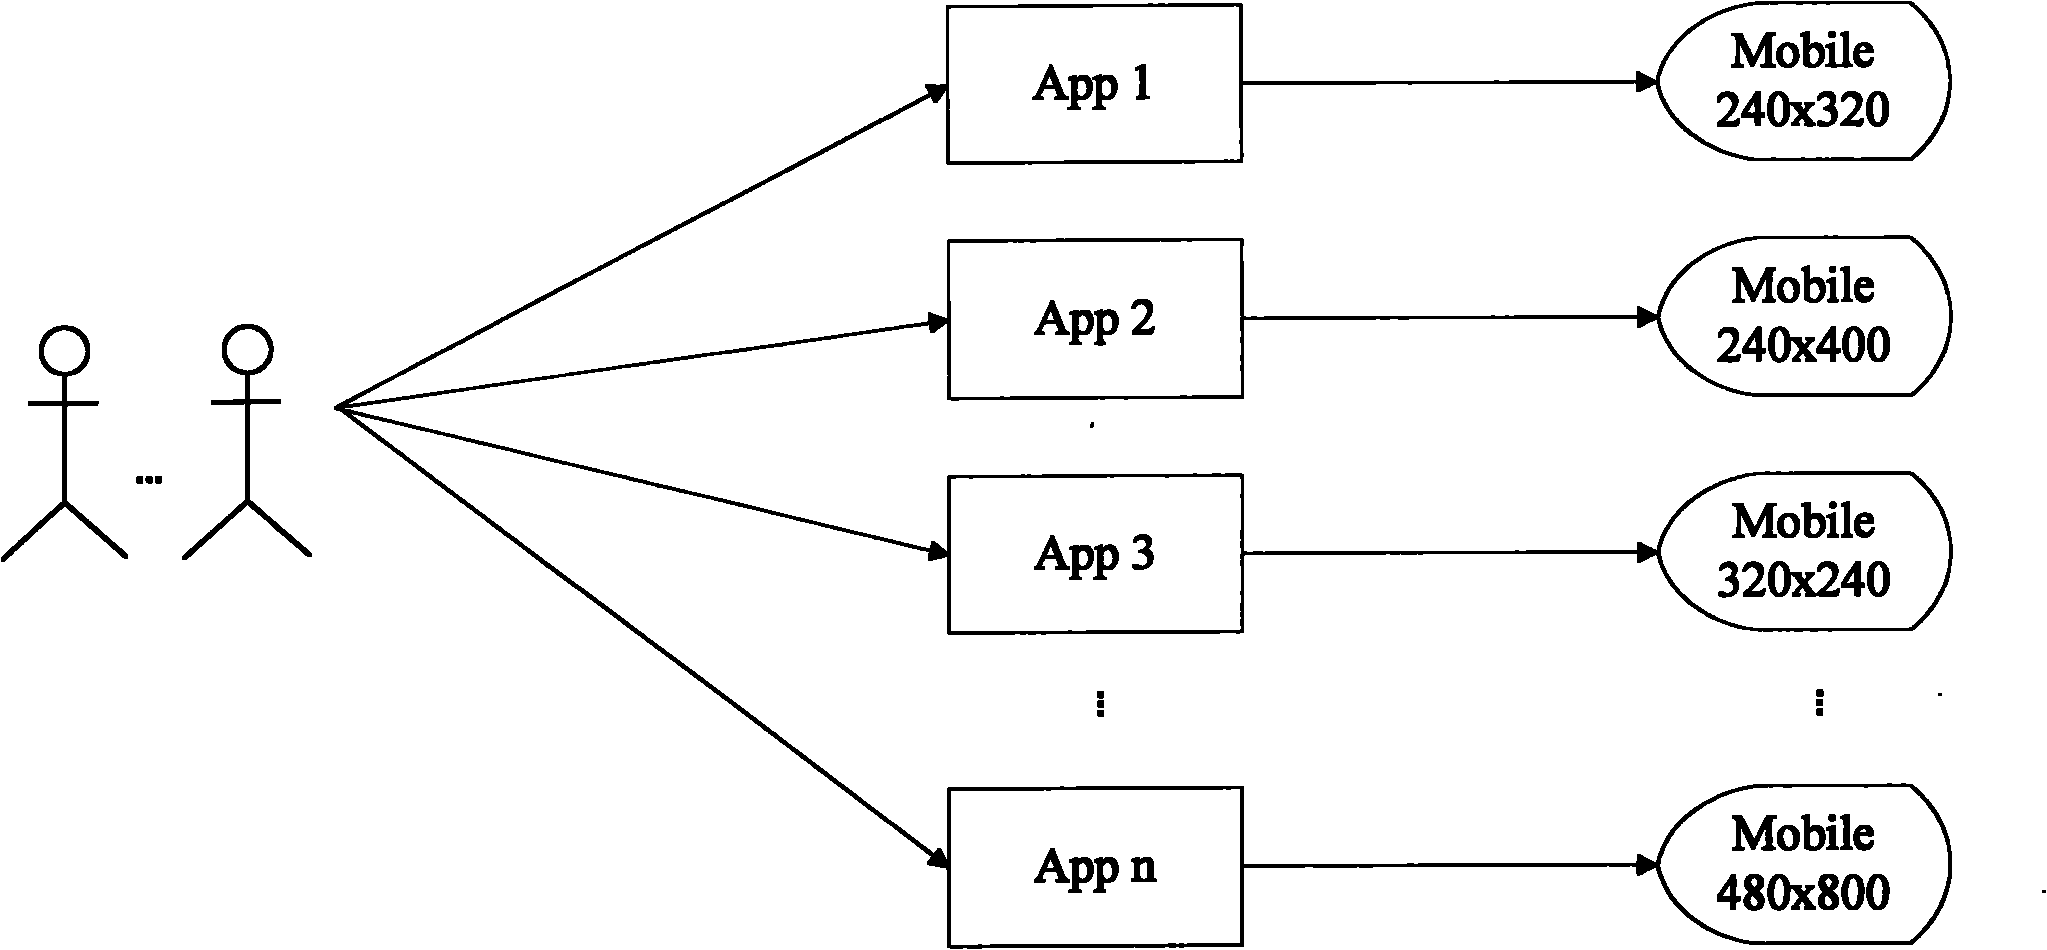 Method for building middleware multi-resolution version codes by configuration files